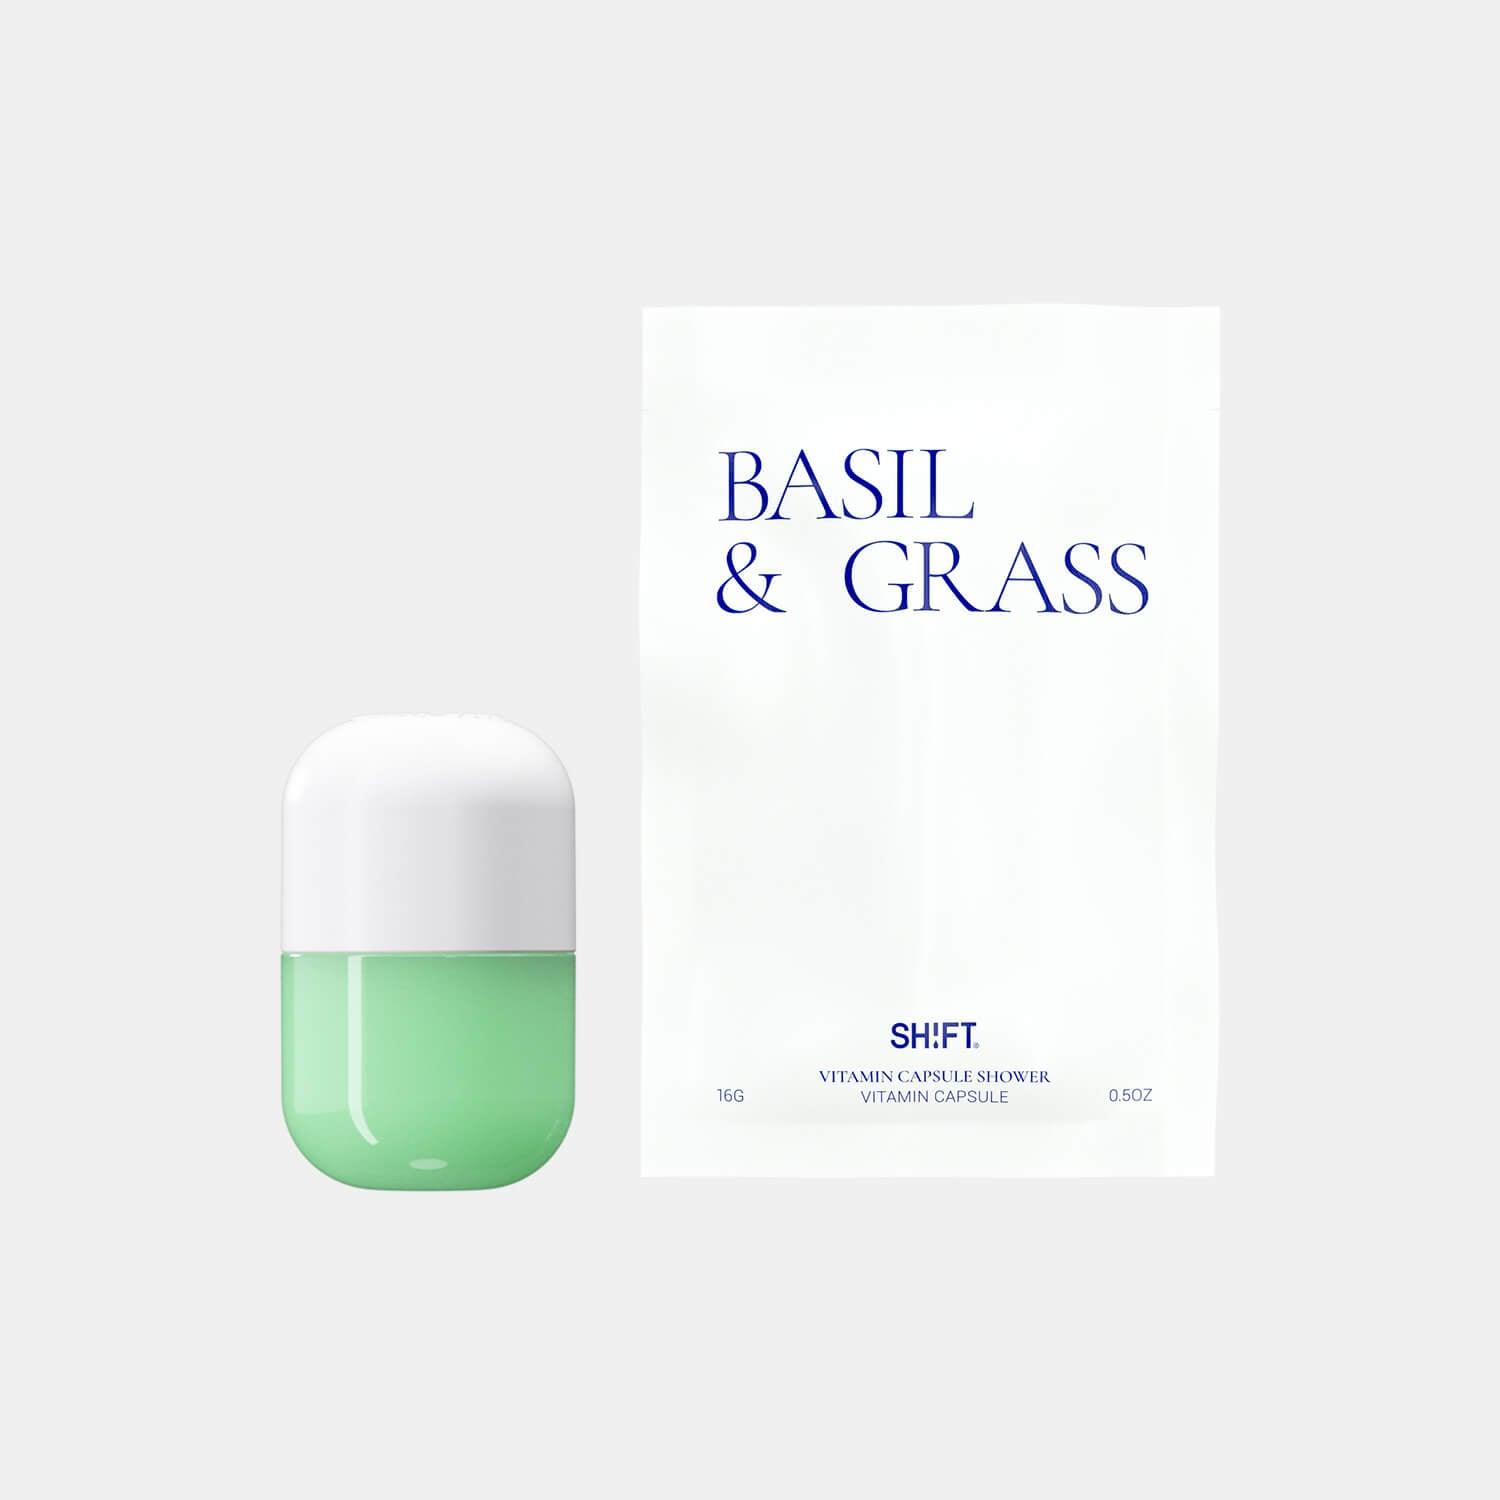 basil & grass - aromatherapy diffuser showerhead scent capsule with shower filter 